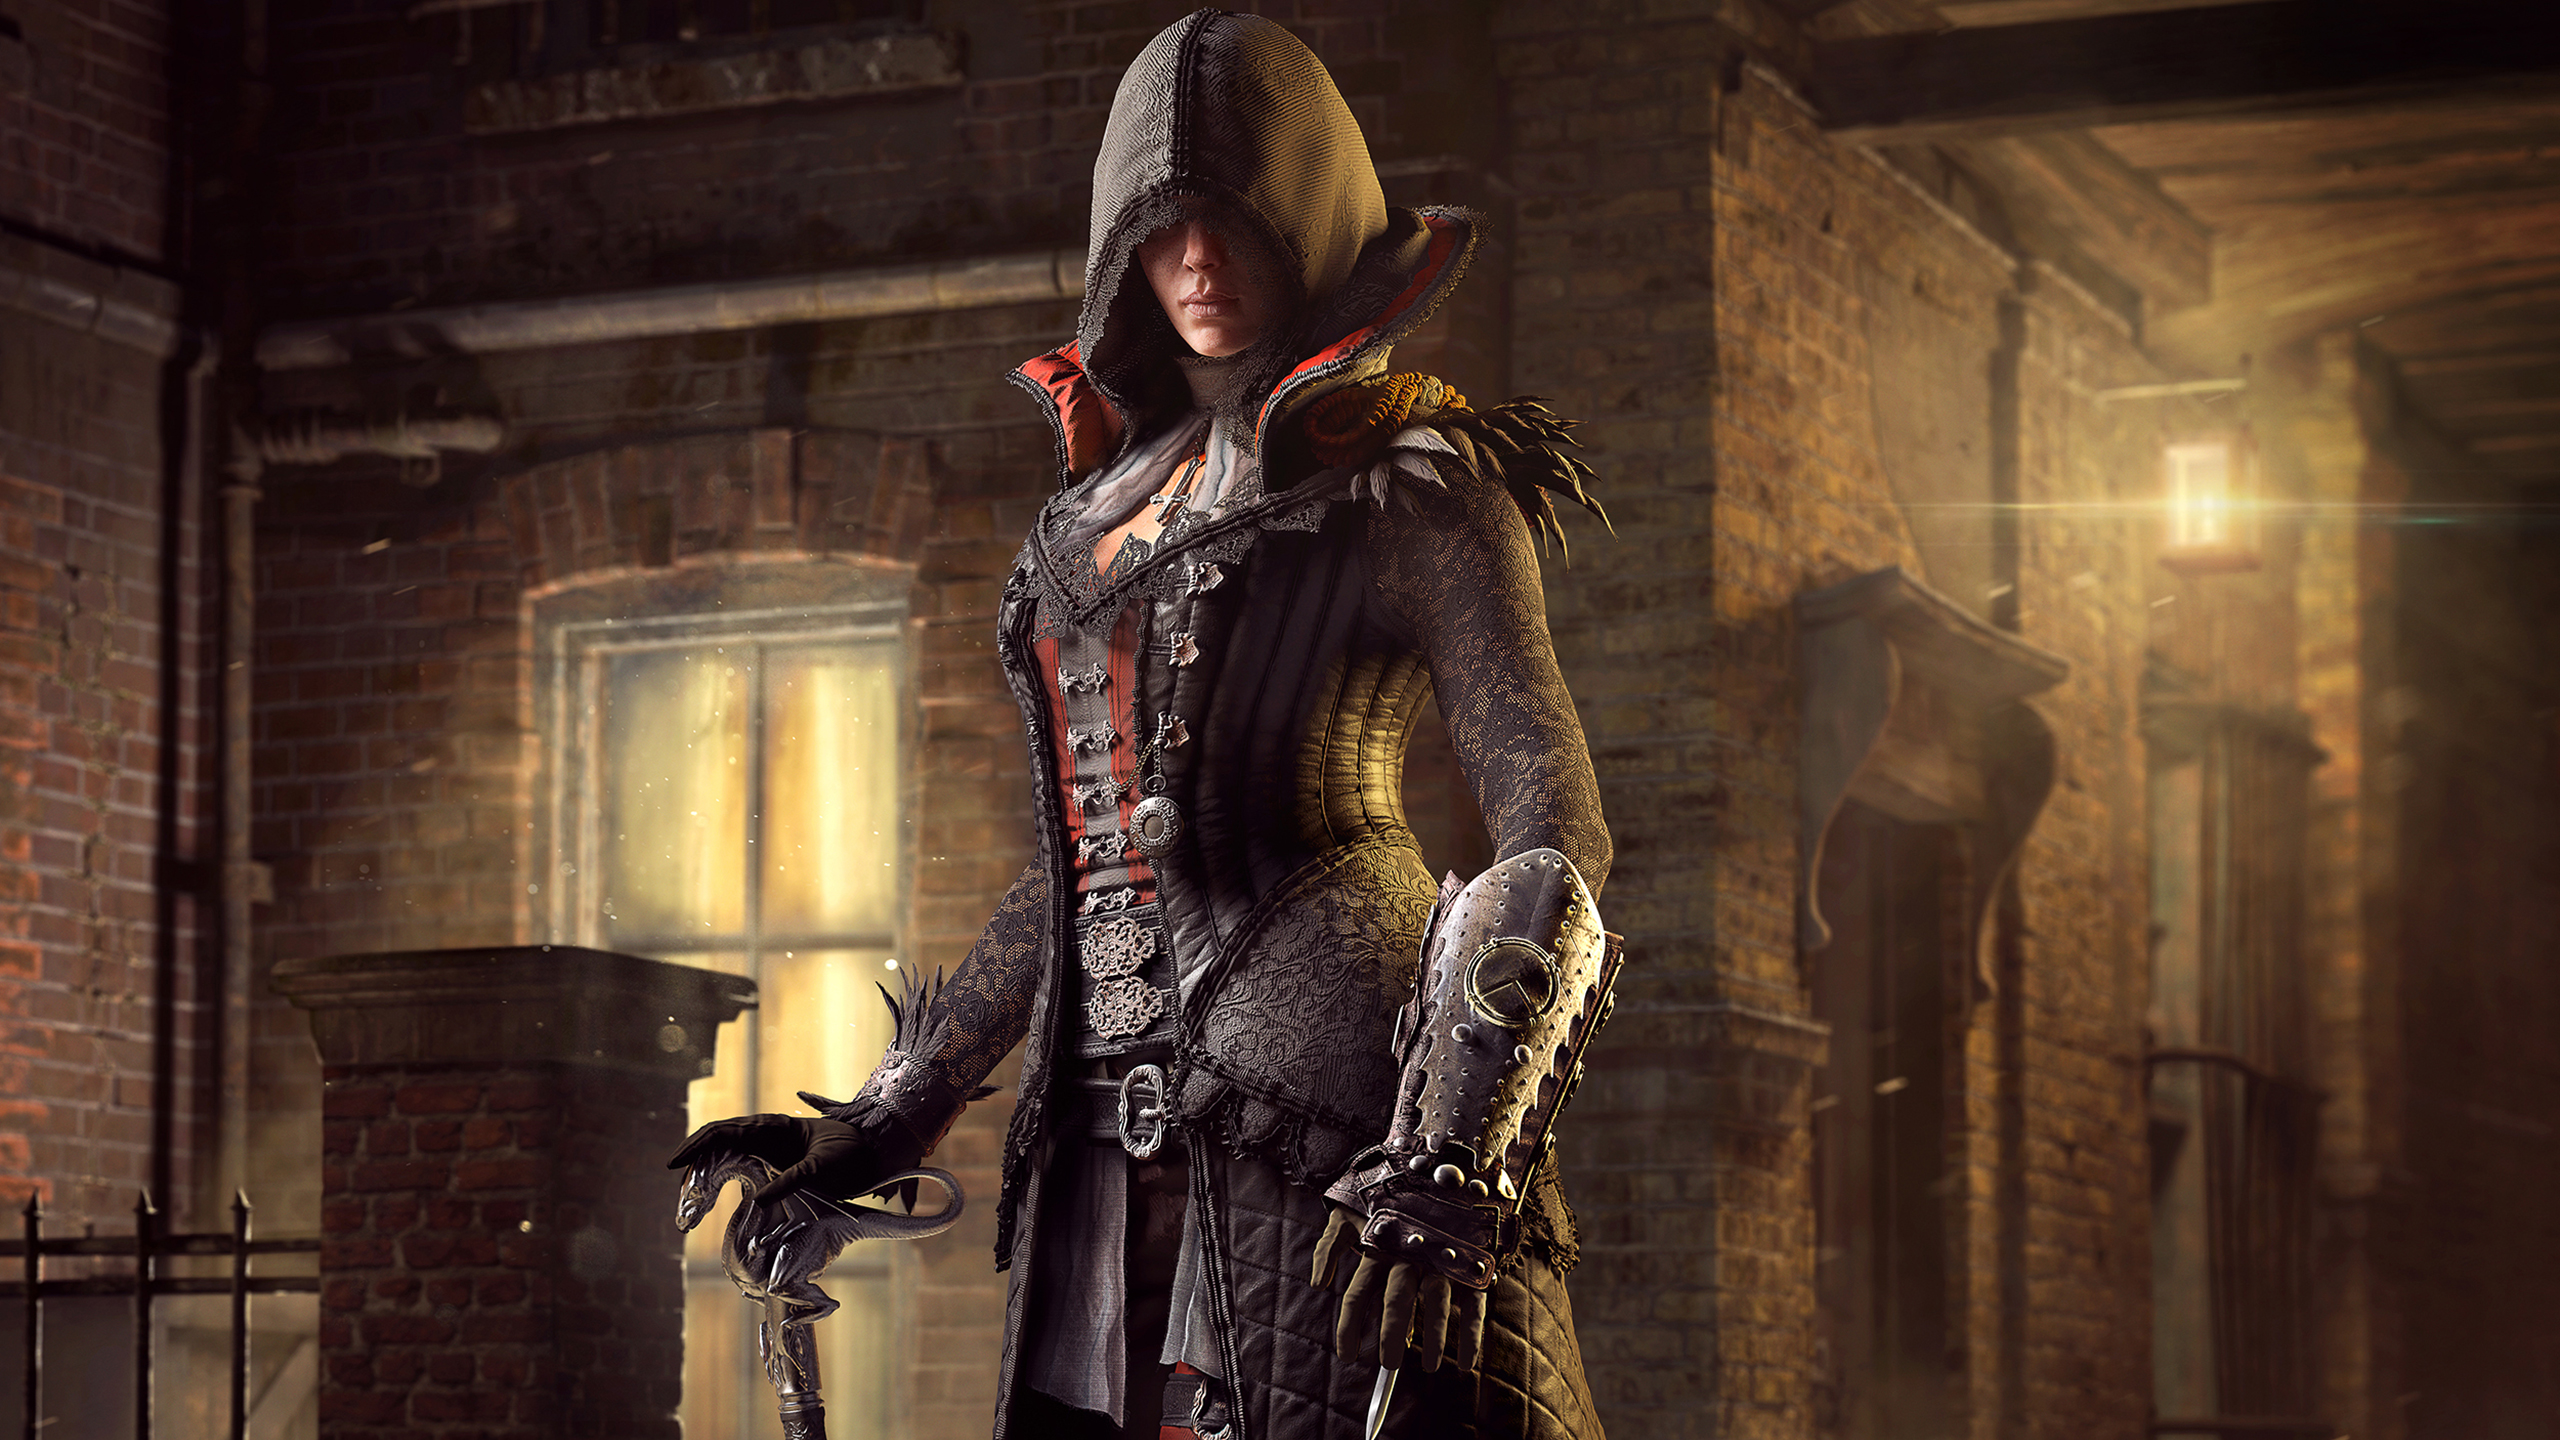 desktop Images video game, assassin's creed: syndicate, evie frye, glove, assassin's creed